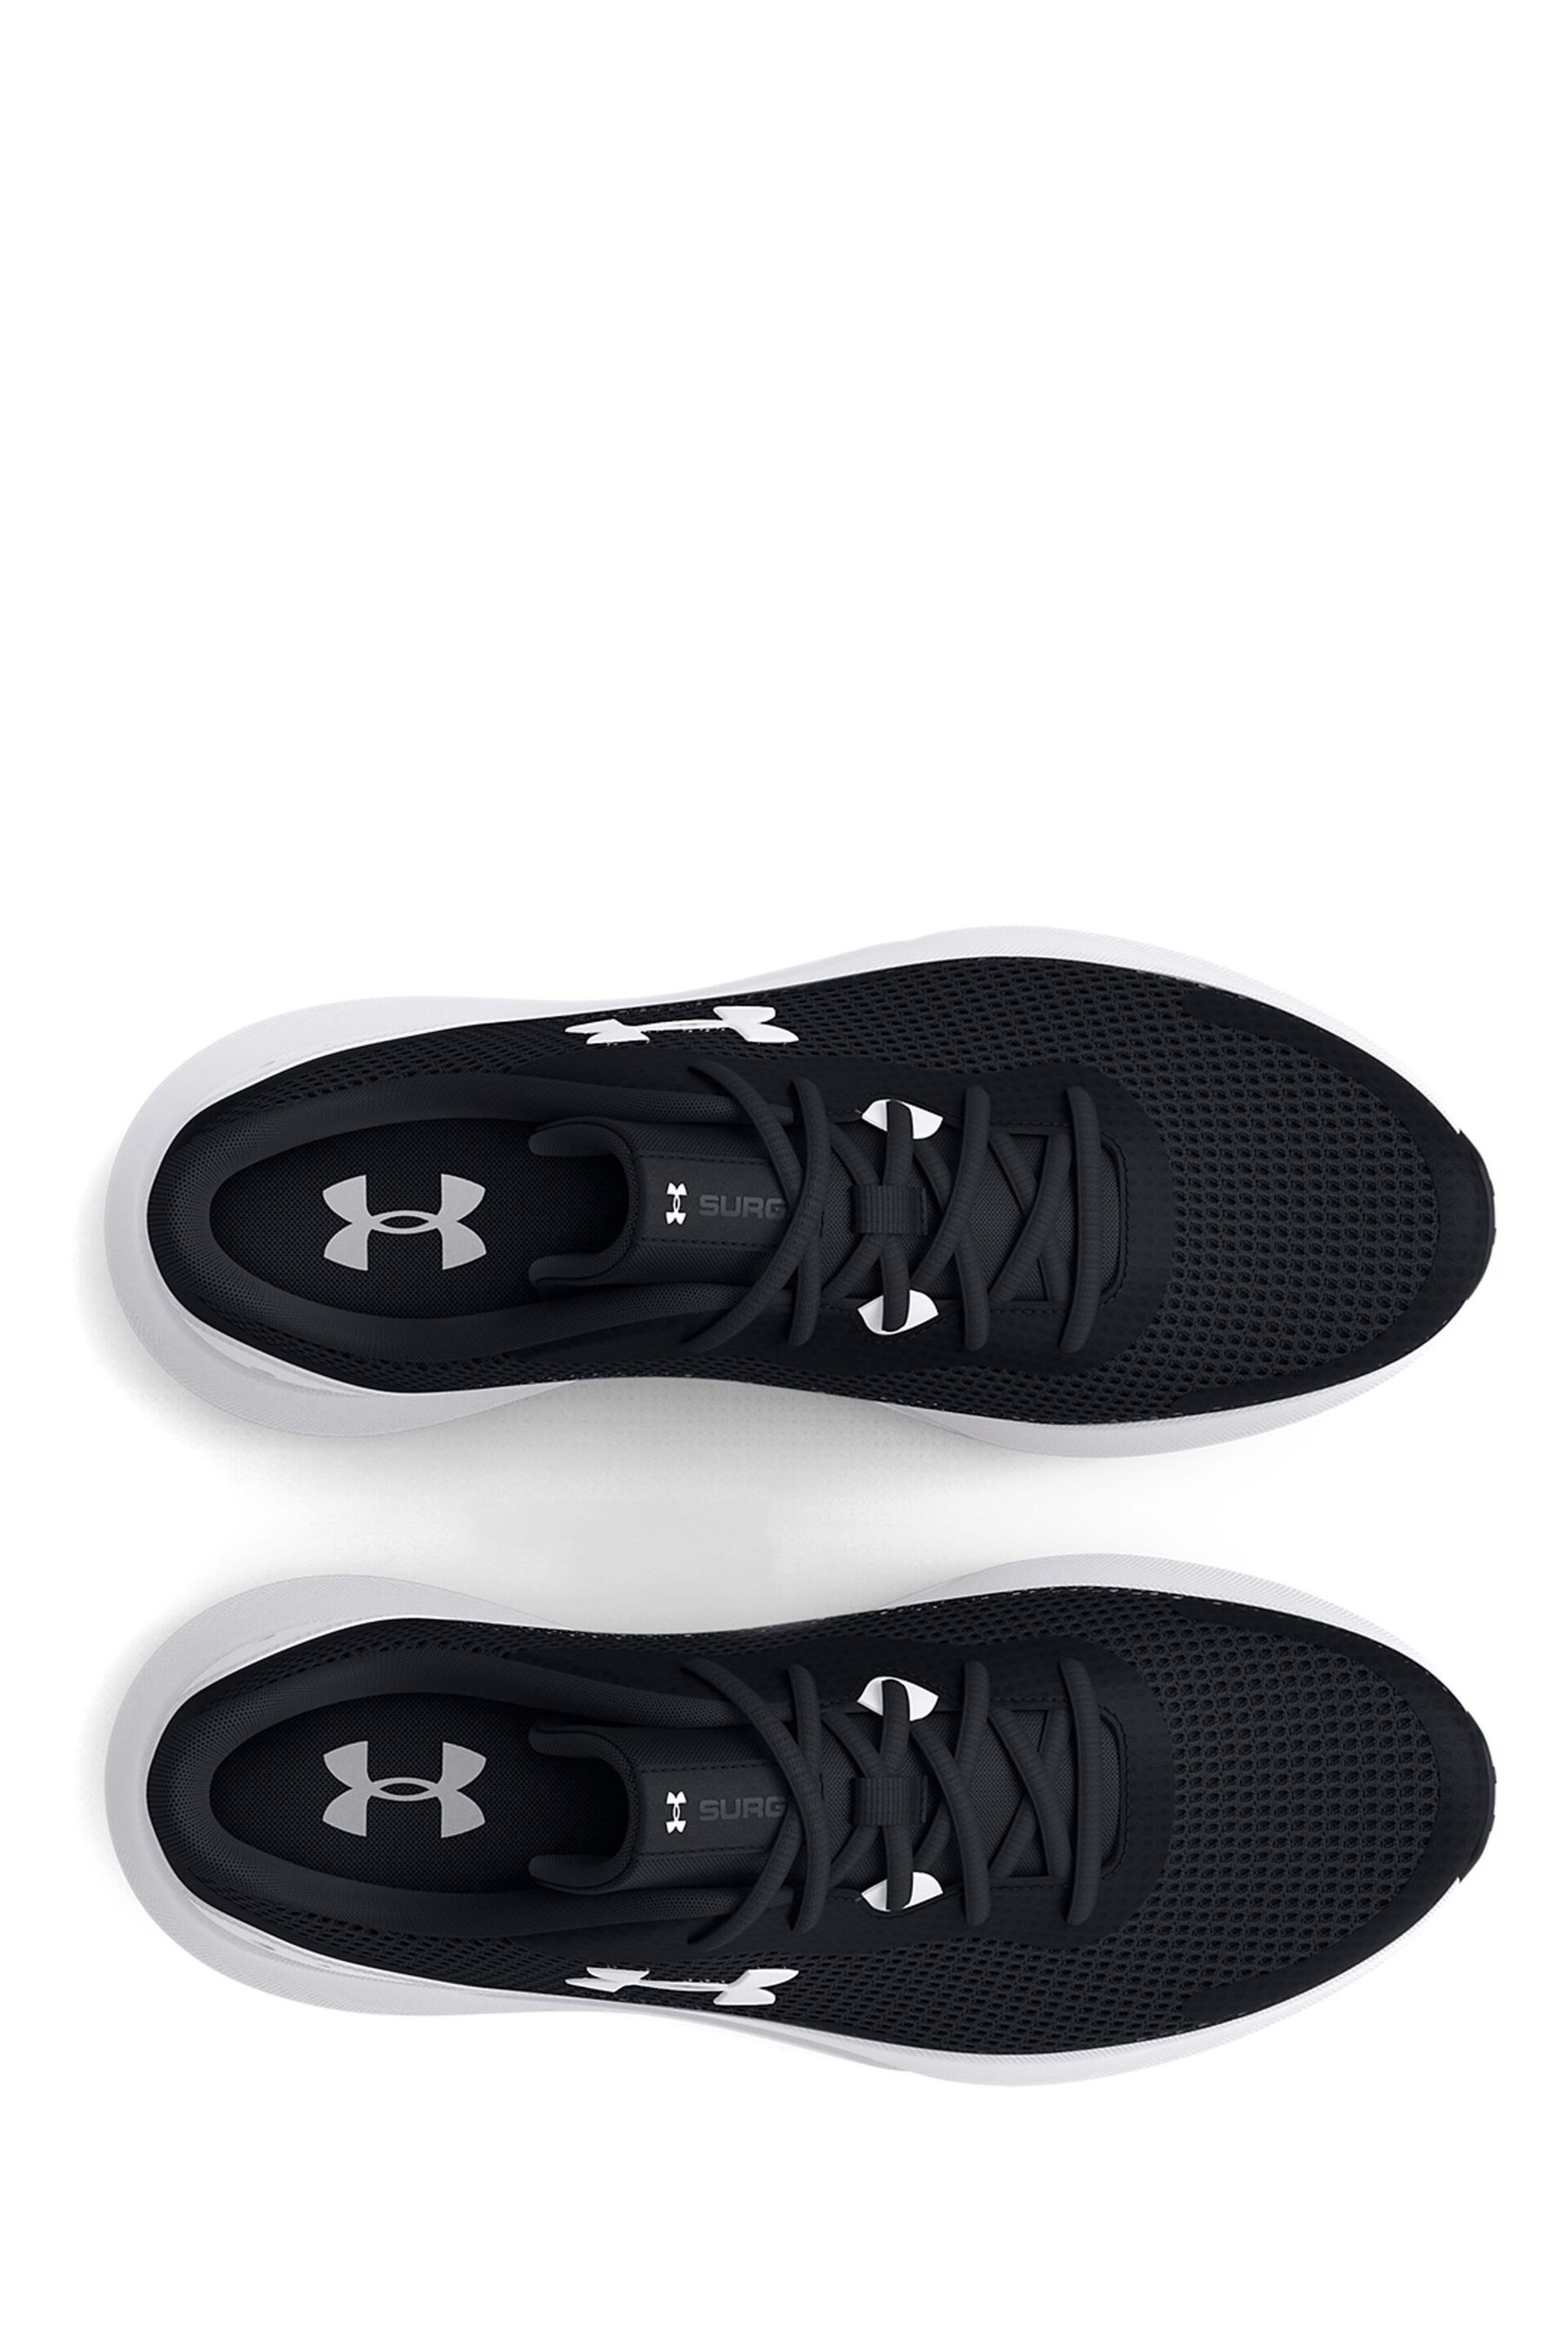 Under Armour Surge 3 Black Trainers - Image 6 of 7